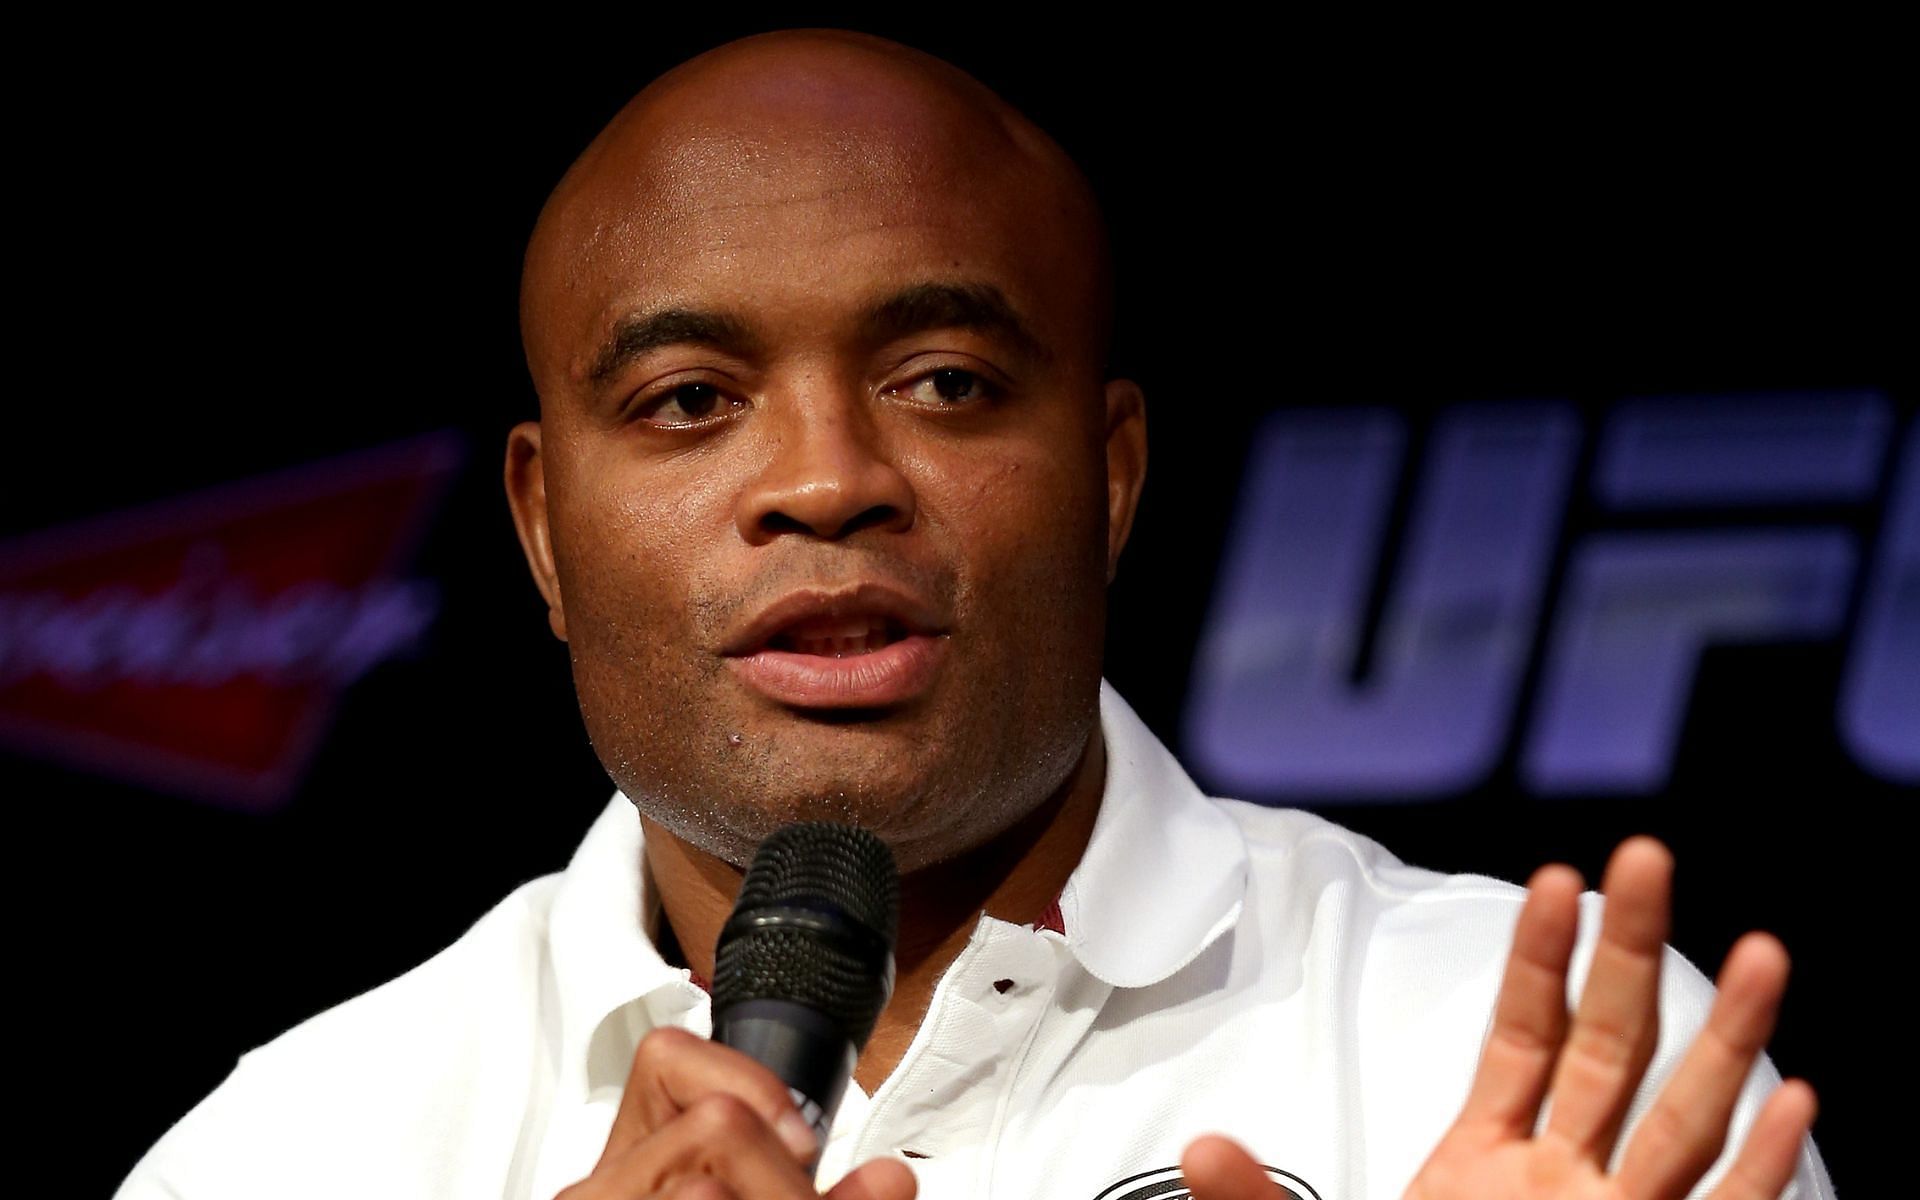 MMA icon and former UFC middleweight champion Anderson Silva